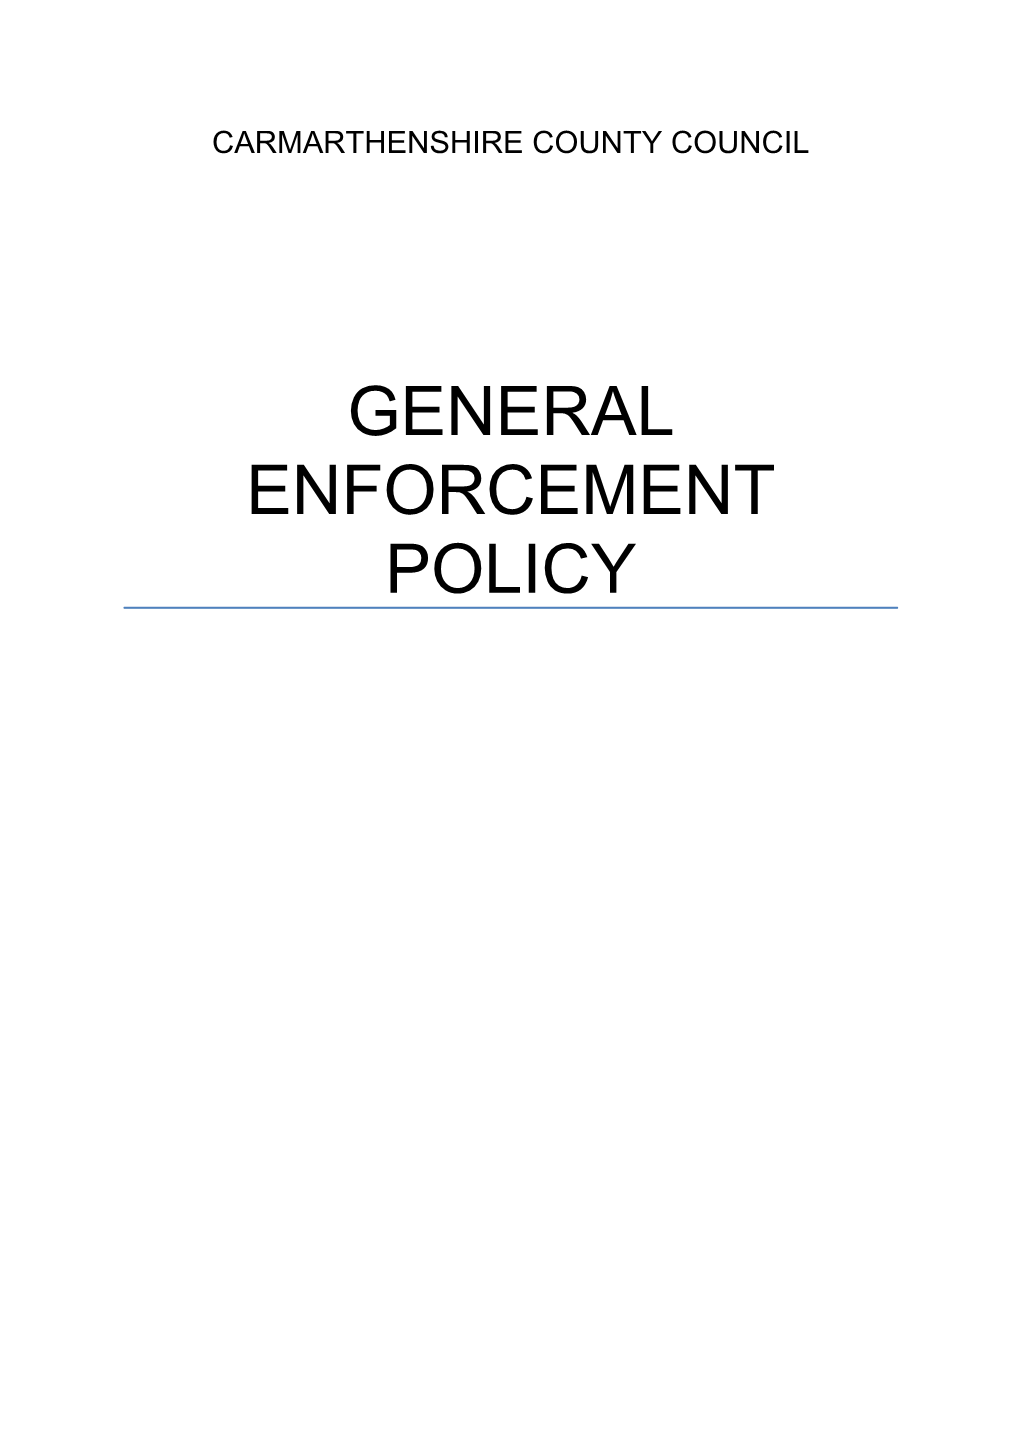 General Enforcement Policy